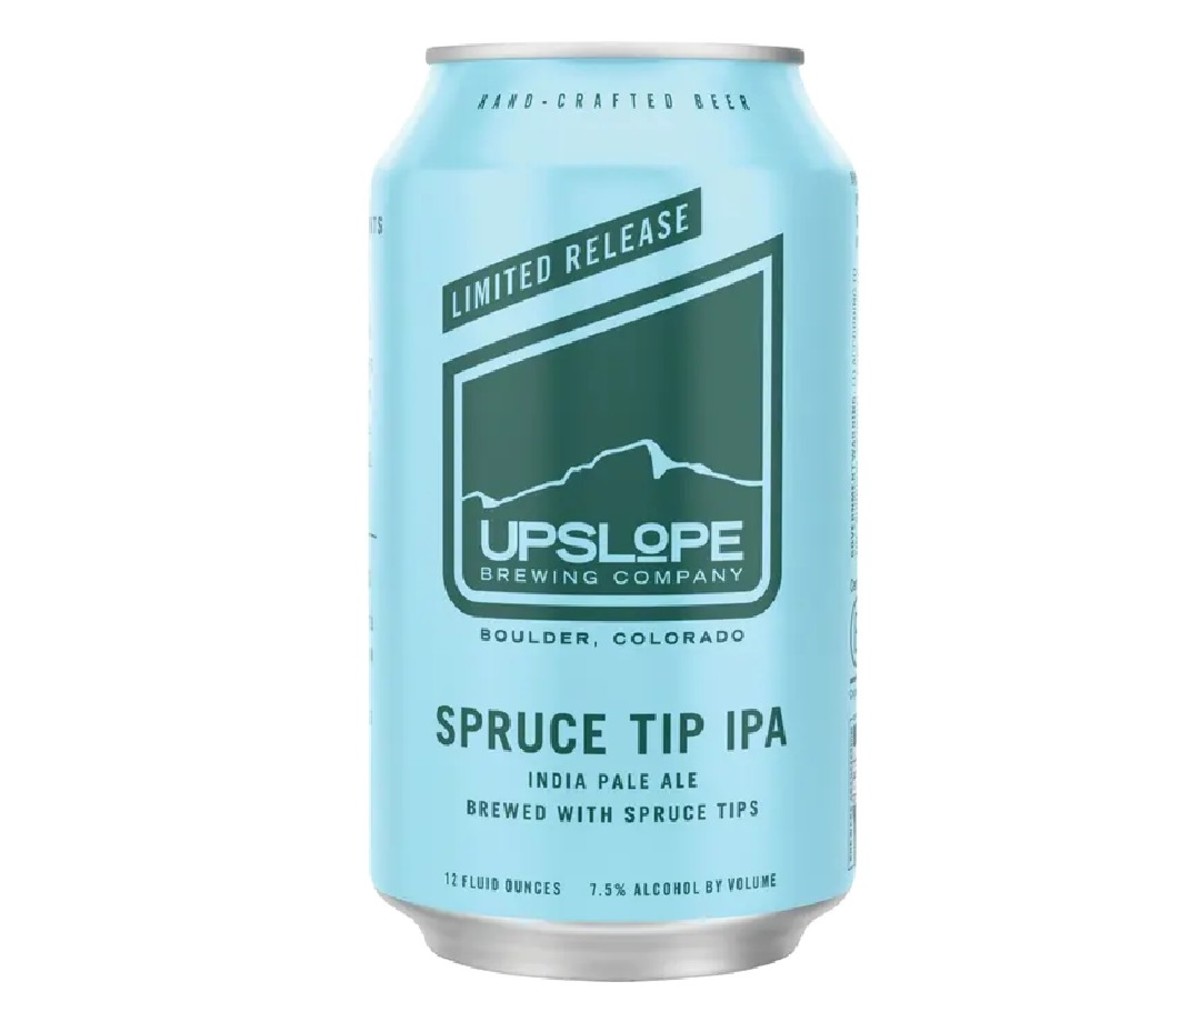 12oz can of Upslope Spruce Tip IPA